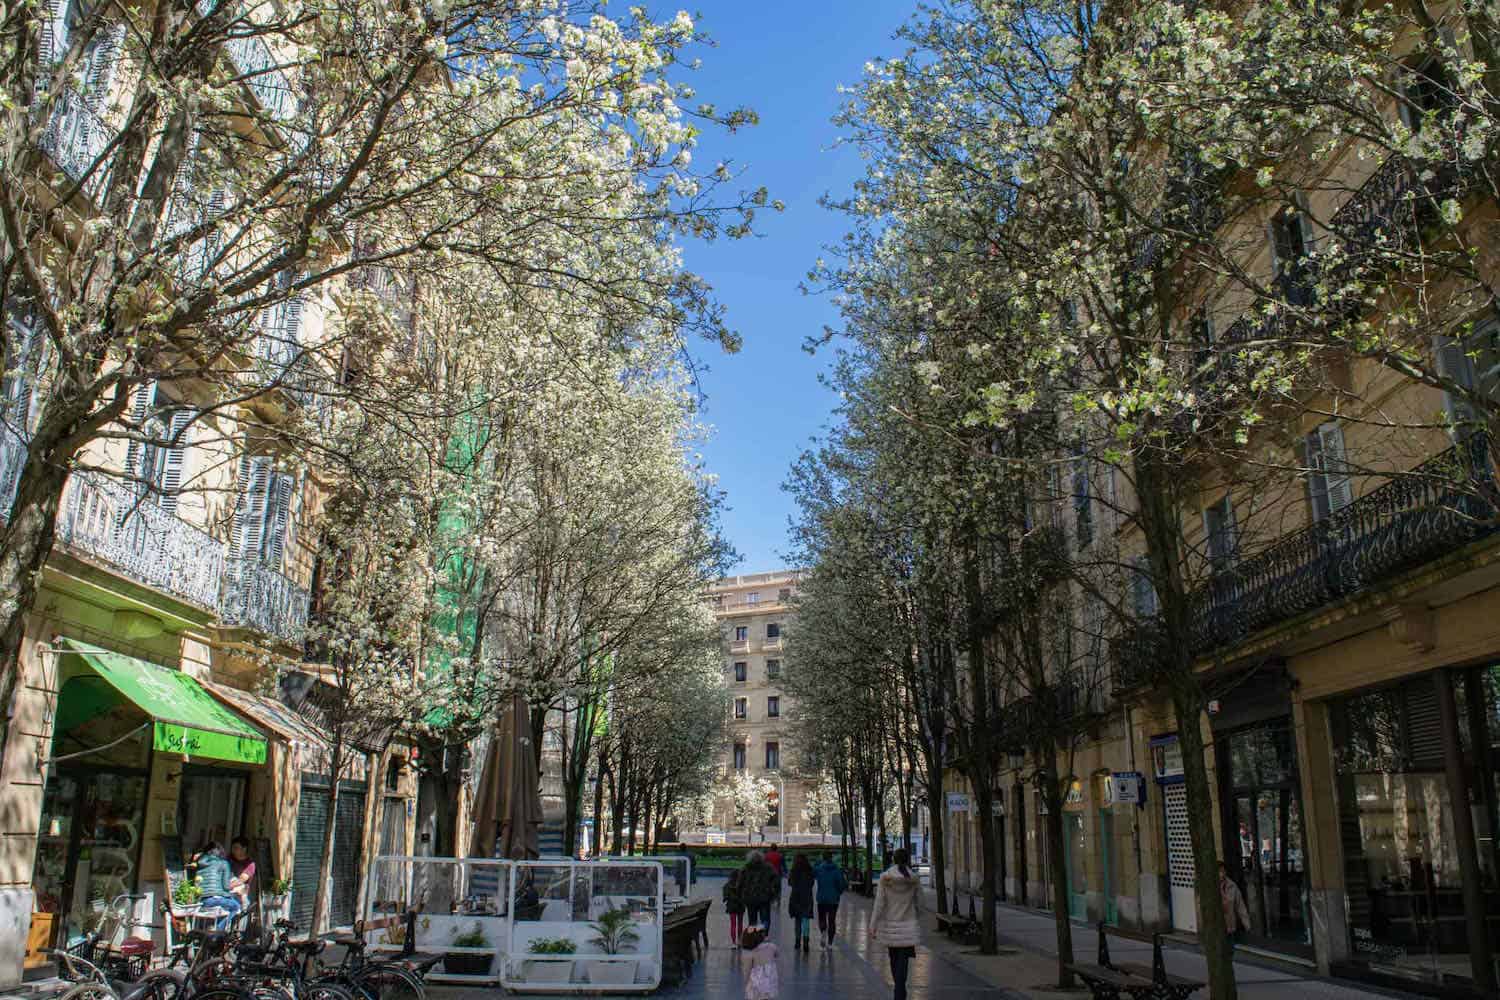 City street in San Sebastian lined with trees that are blooming white